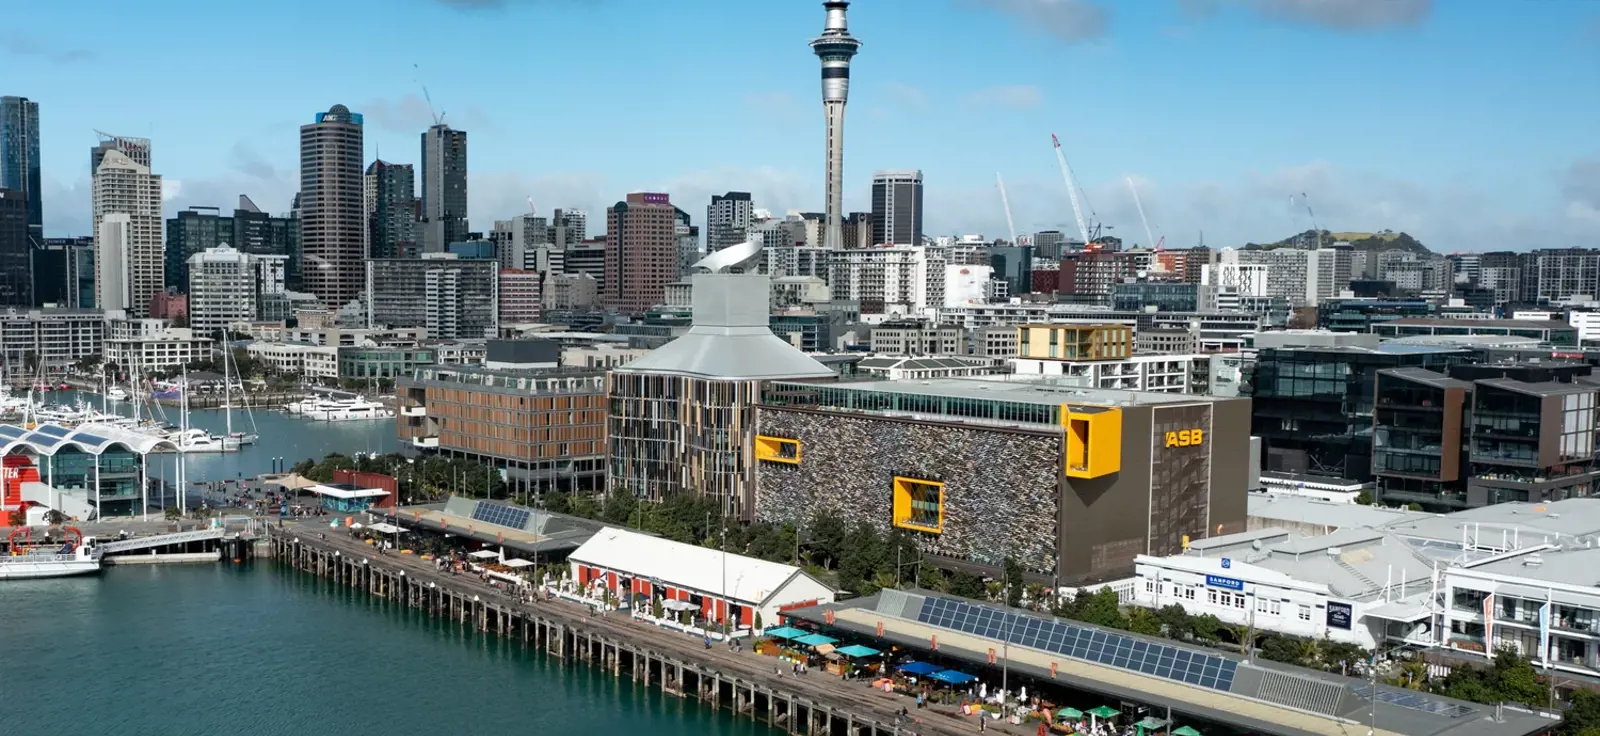 Watch The Progress Of The City Centre And Waterfront Unfold